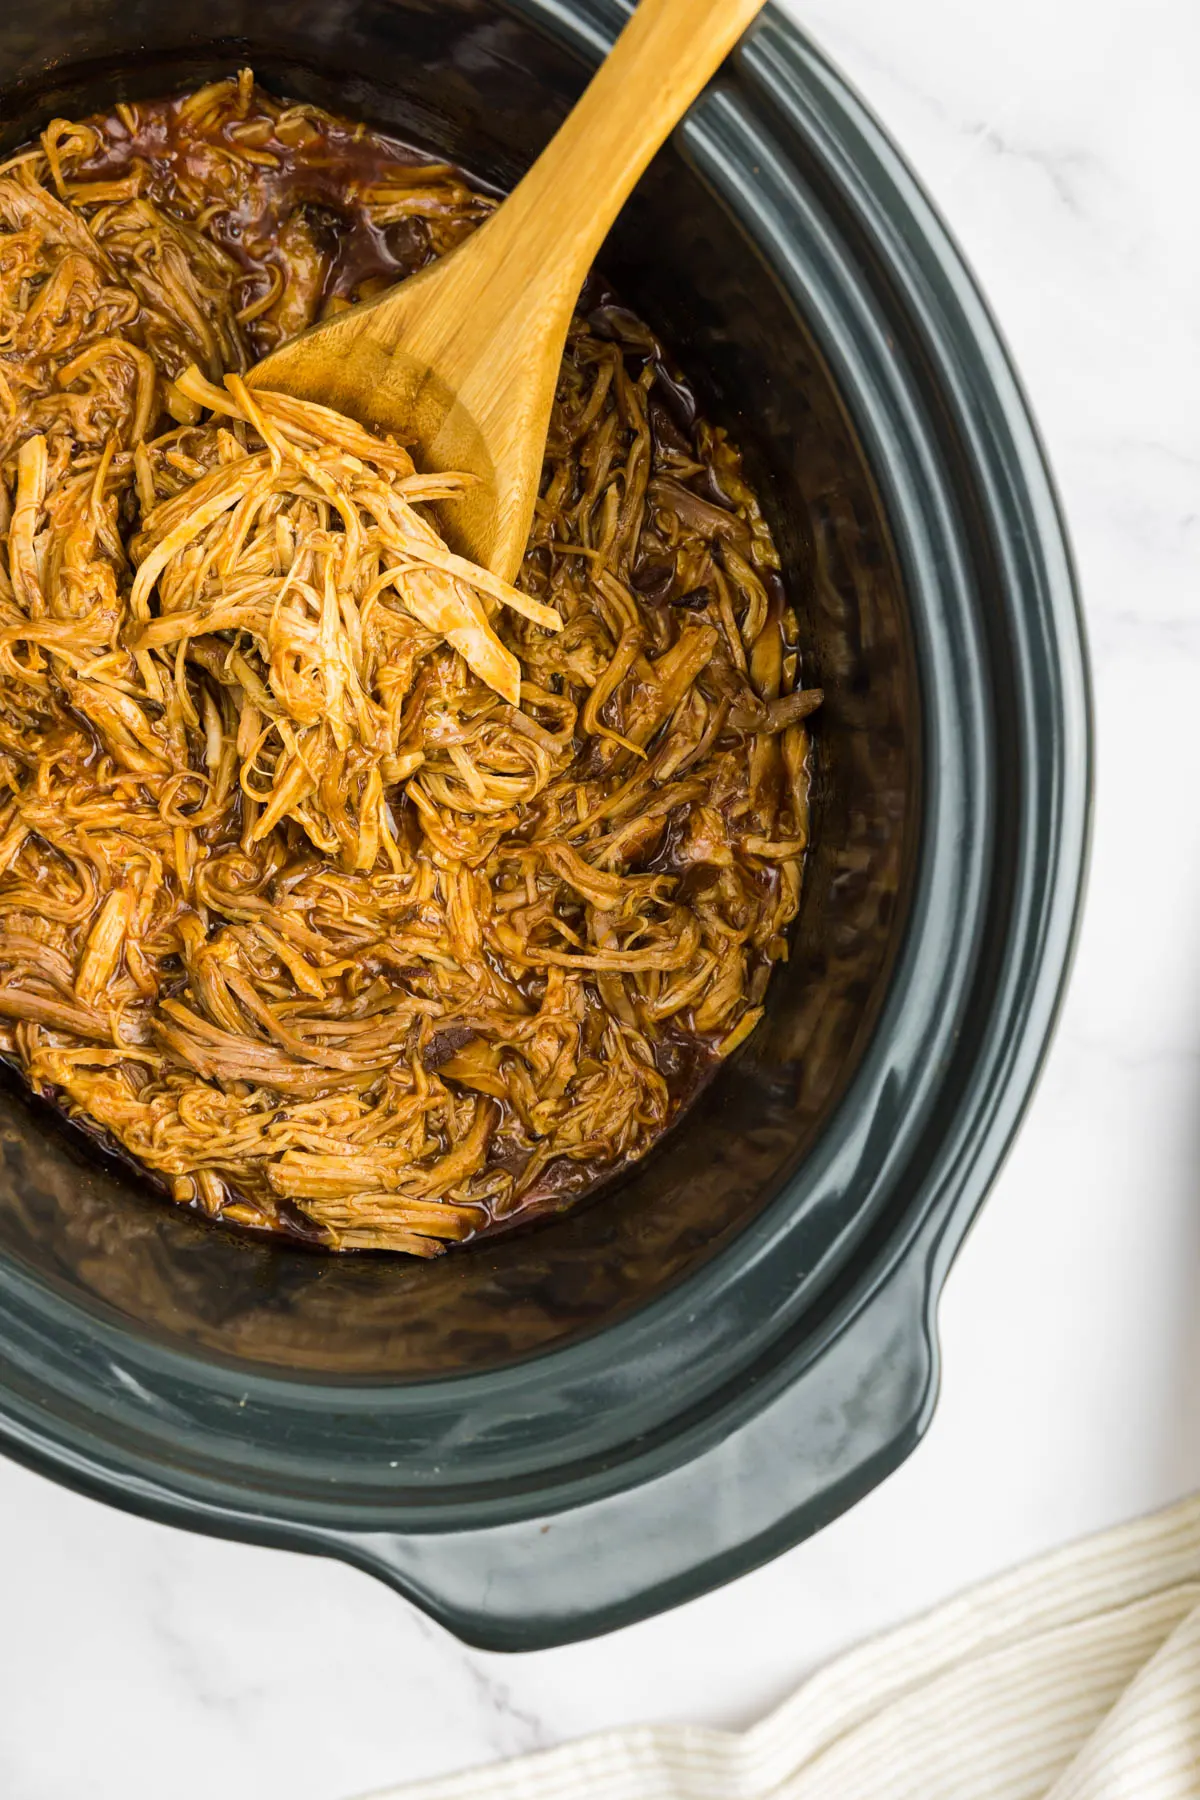 Slow cooker pulled pork with bbq